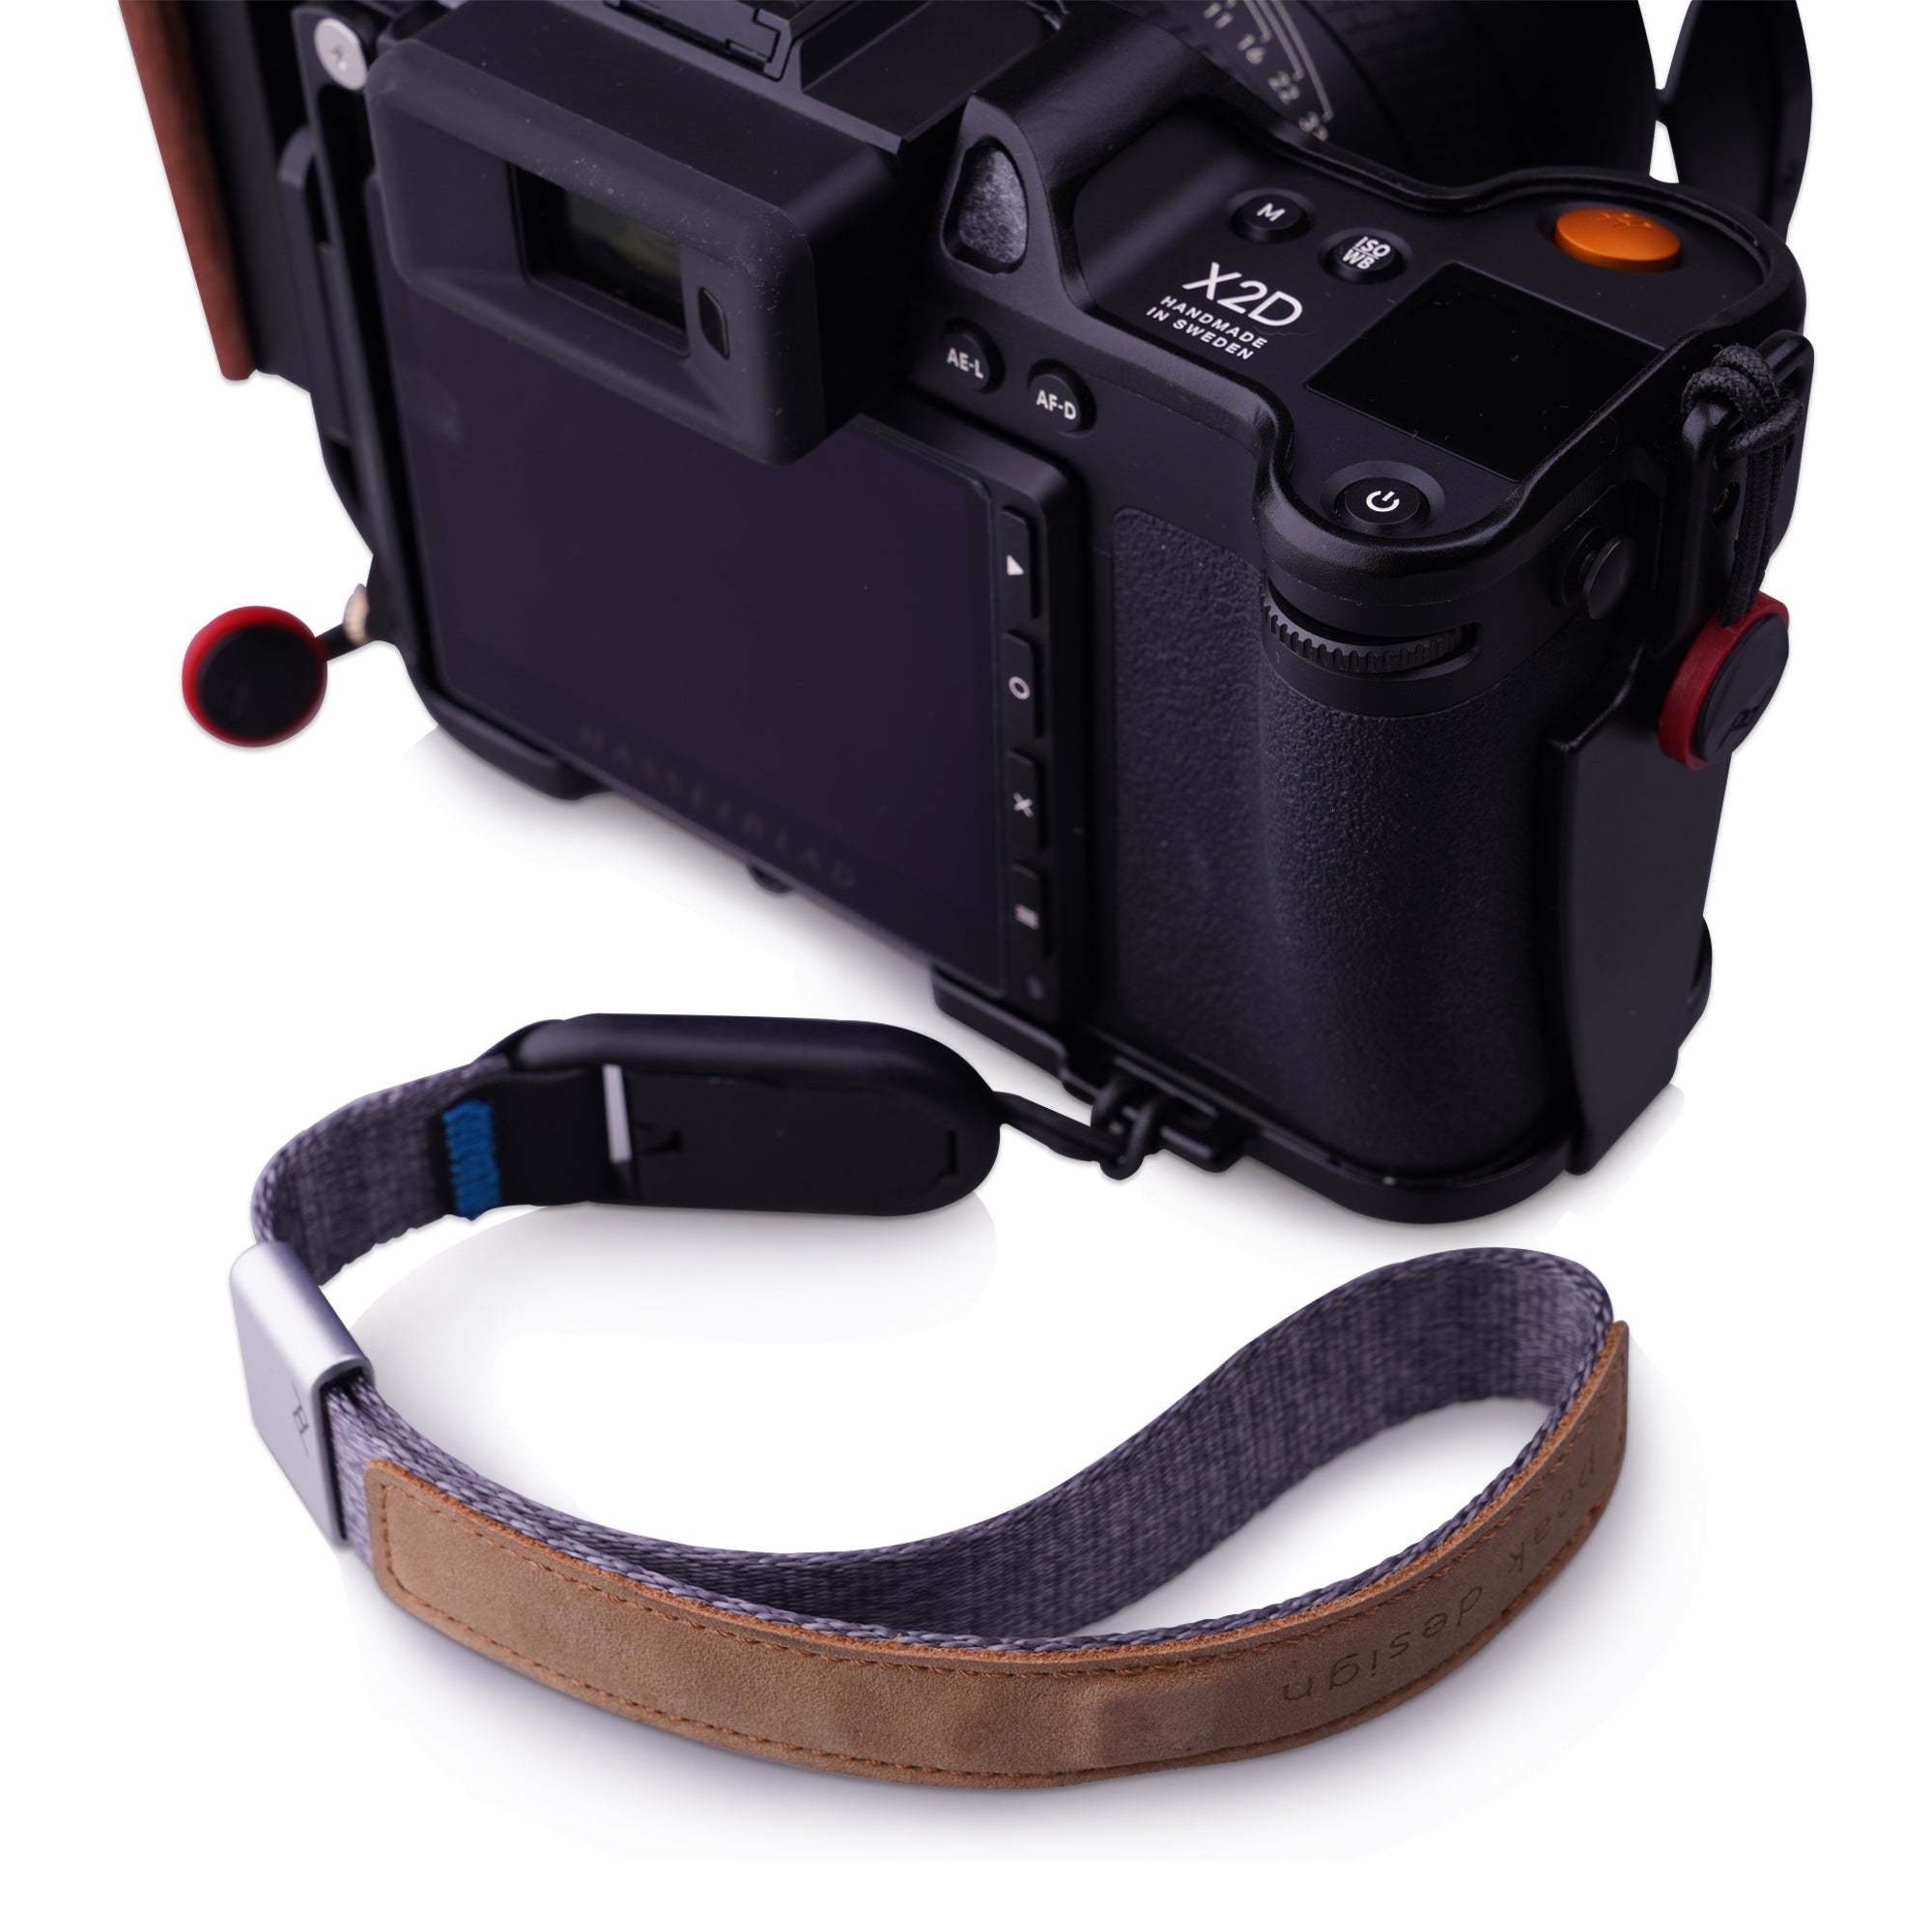 Lanhorse Modular Cage and Handgrip for Hasselblad X2D 100C, Lens Protector Frame Options.